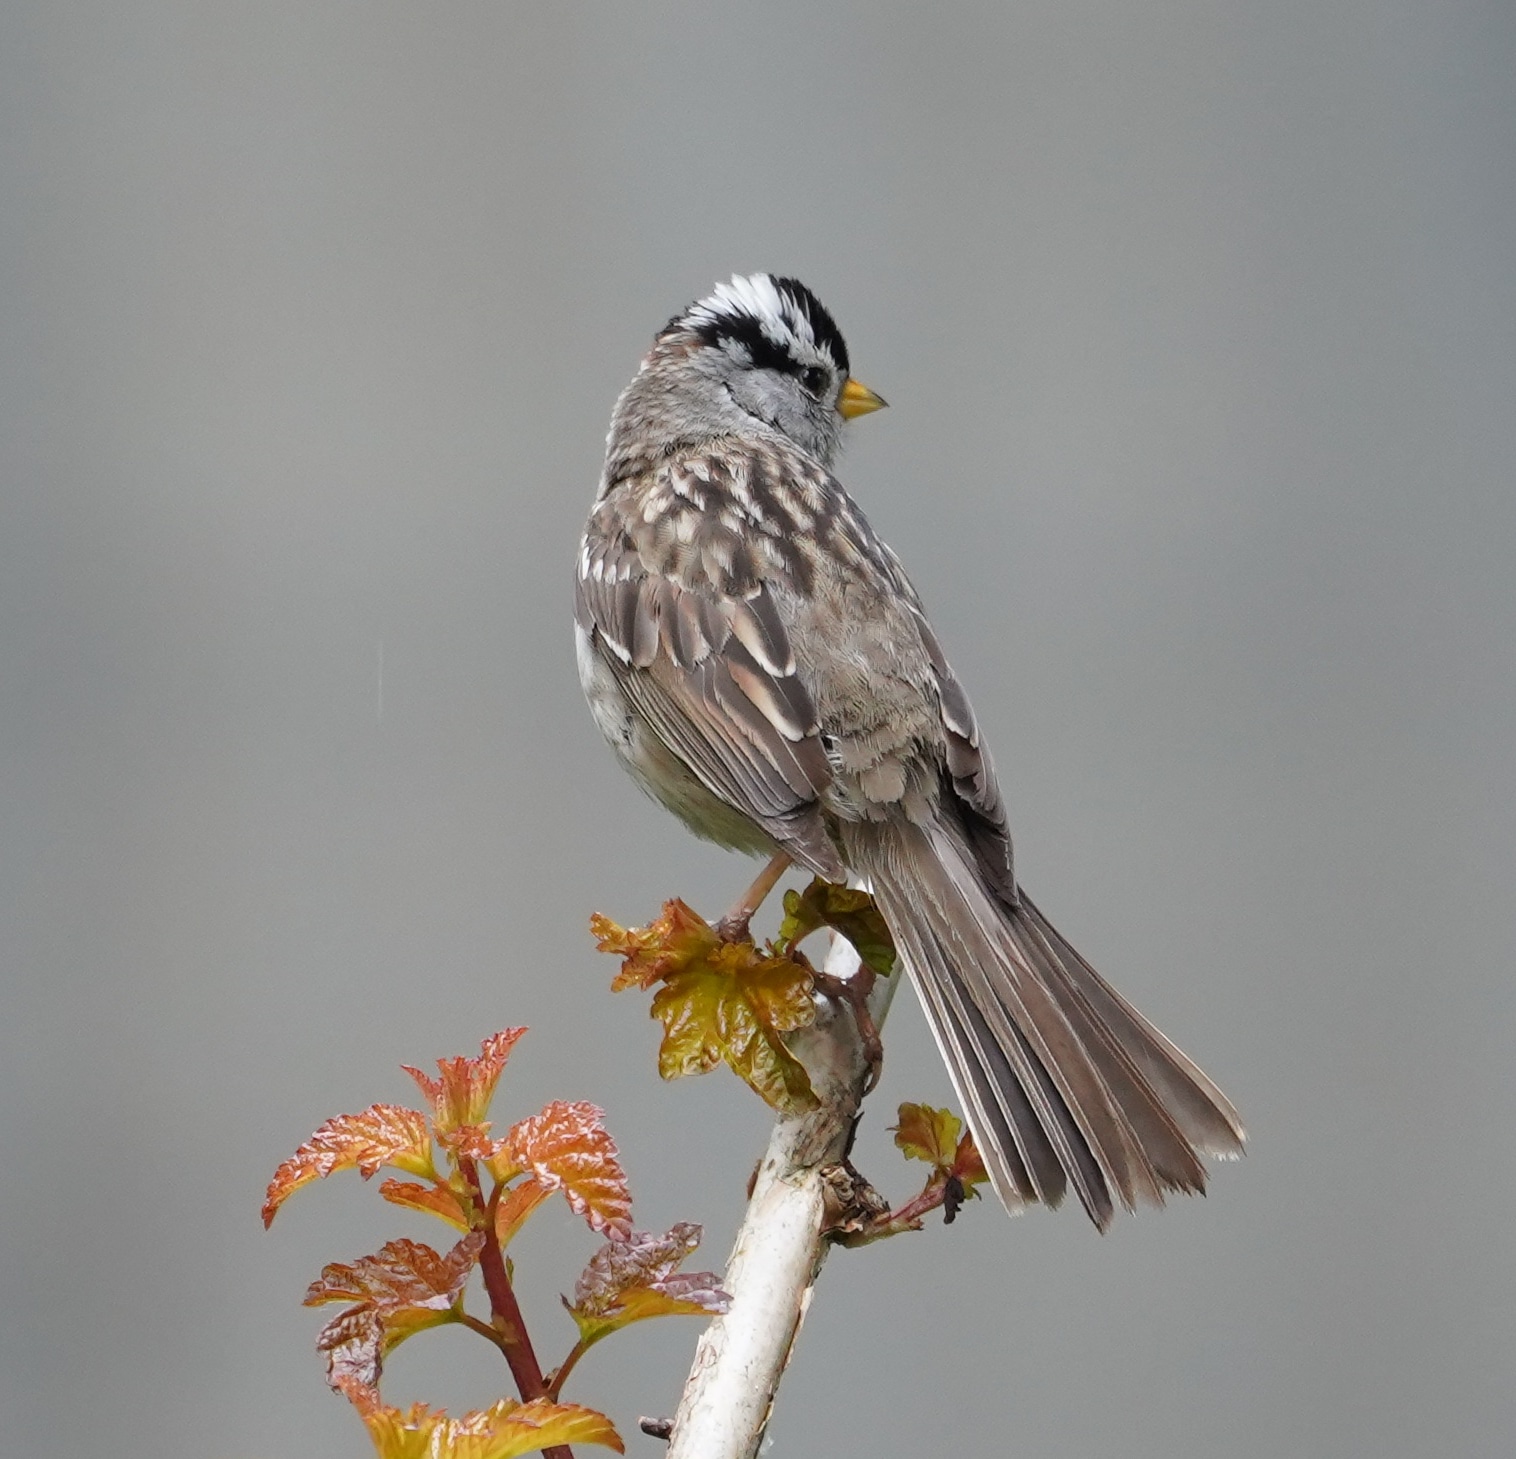 White-crowned sparrow posing